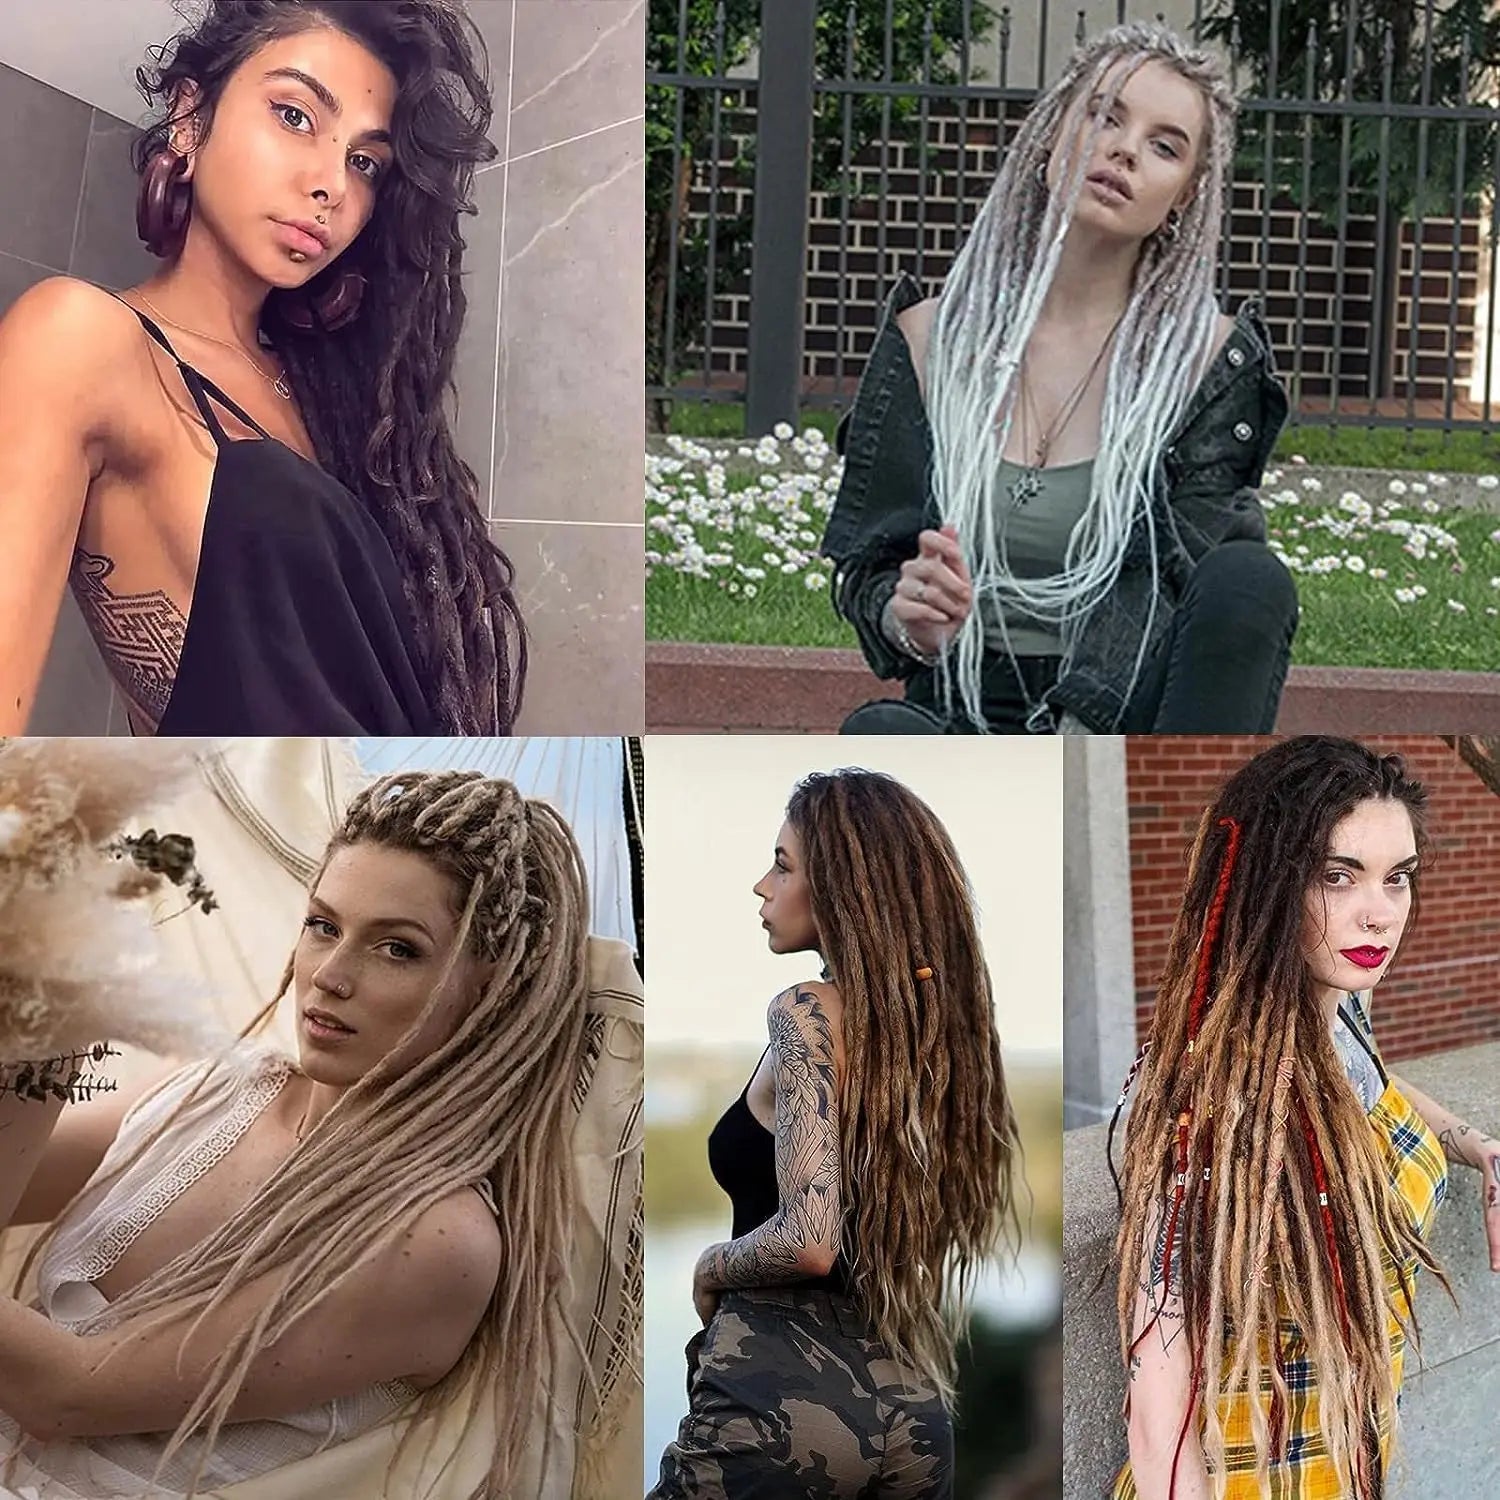 24 Inch Synthetic Dreadlock Extensions | 5 Strands Hippie Dreads | Ombre Color | 0.6 cm Width Loc Extensions | Reggae Style Crochet Hair ShopOnlyDeal